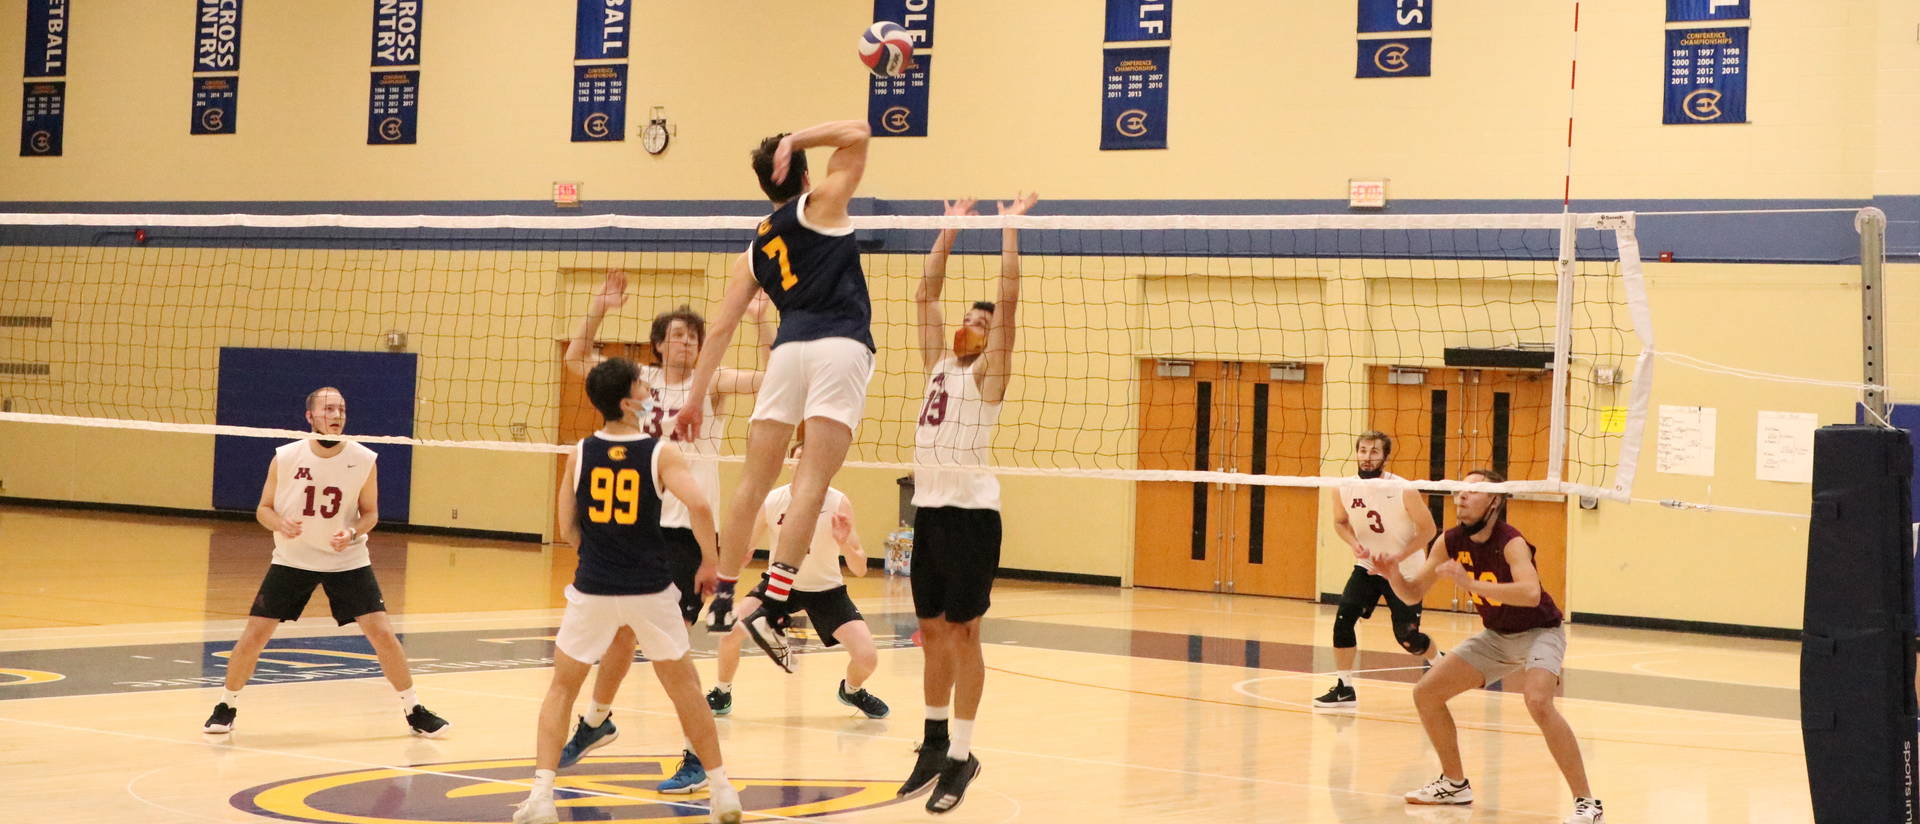 Competitive Sports Mens Volleyball